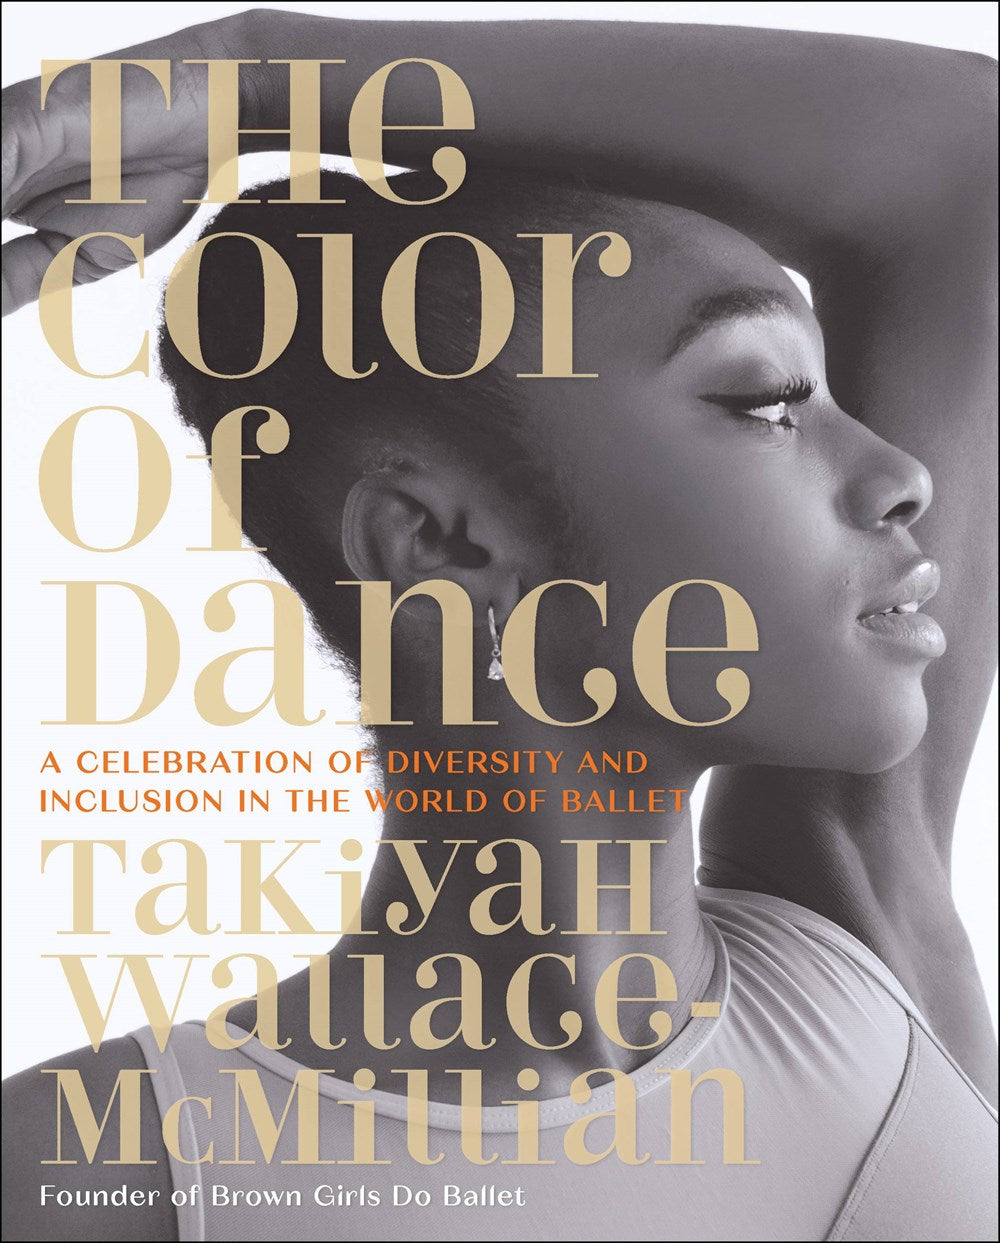 PRE-ORDER: The Color of Dance: A Celebration of Diversity and Inclusion in the World of Ballet